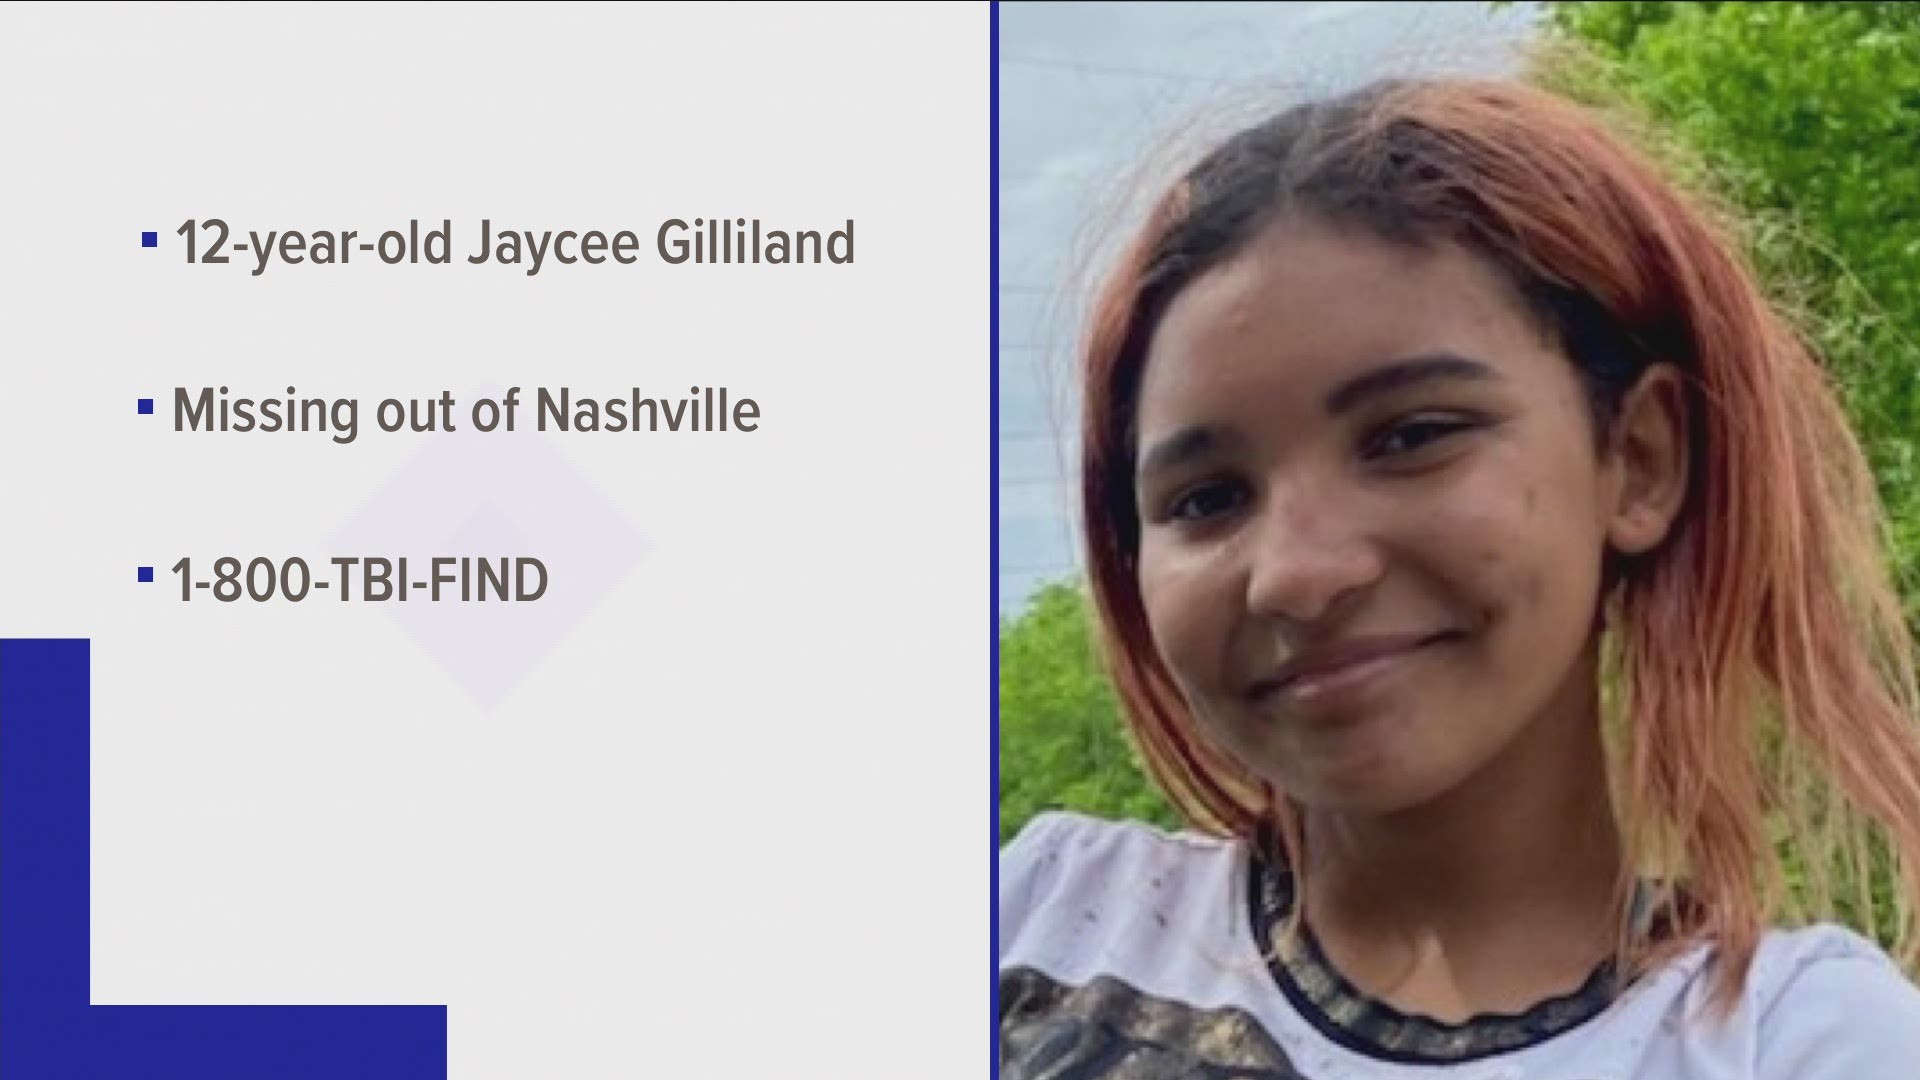 Authorities are searching for a missing 12-year-old girl from Nashville.